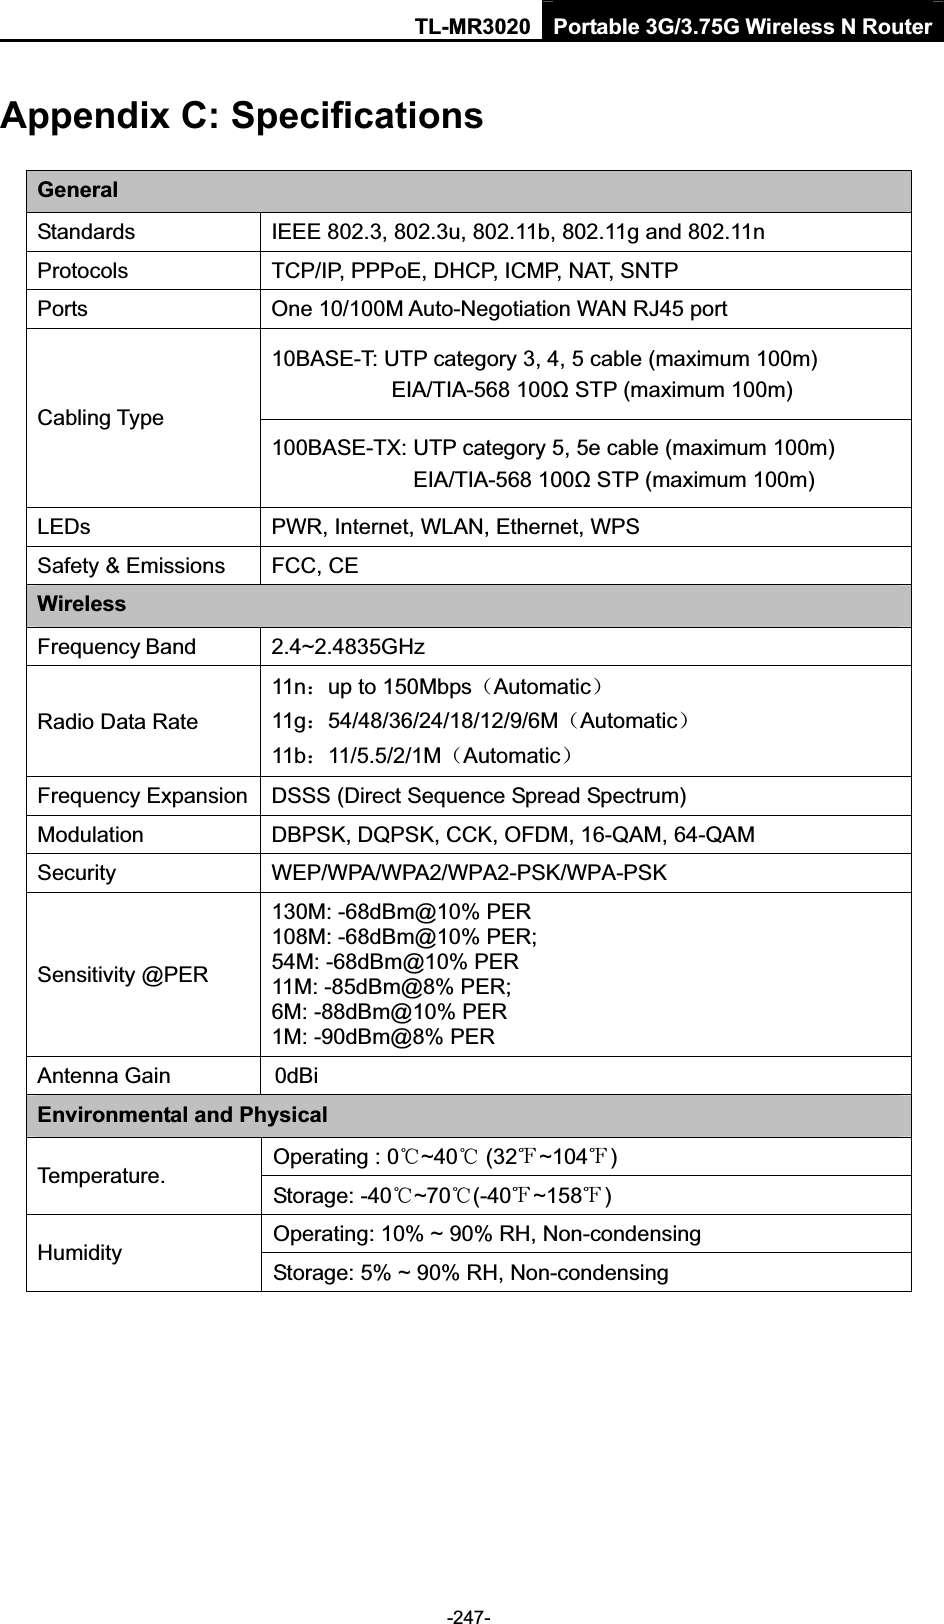 TL-MR3020 Portable 3G/3.75G Wireless N Router-247-Appendix C: Specifications GeneralStandards  IEEE 802.3, 802.3u, 802.11b, 802.11g and 802.11n Protocols  TCP/IP, PPPoE, DHCP, ICMP, NAT, SNTP Ports  One 10/100M Auto-Negotiation WAN RJ45 port 10BASE-T: UTP category 3, 4, 5 cable (maximum 100m) EIA/TIA-568 100ȍ STP (maximum 100m) Cabling Type 100BASE-TX: UTP category 5, 5e cable (maximum 100m) EIA/TIA-568 100ȍ STP (maximum 100m) LEDs PWR, Internet, WLAN, Ethernet, WPS Safety &amp; Emissions  FCC, CE Wireless Frequency Band 2.4~2.4835GHz Radio Data Rate 11n˖up to 150Mbps˄Automatic˅11g˖54/48/36/24/18/12/9/6M˄Automatic˅11b˖11/5.5/2/1M˄Automatic˅Frequency Expansion  DSSS (Direct Sequence Spread Spectrum) Modulation DBPSK, DQPSK, CCK, OFDM, 16-QAM, 64-QAM Security  WEP/WPA/WPA2/WPA2-PSK/WPA-PSK Sensitivity @PER 130M: -68dBm@10% PER 108M: -68dBm@10% PER;   54M: -68dBm@10% PER 11M: -85dBm@8% PER;   6M: -88dBm@10% PER 1M: -90dBm@8% PER Antenna Gain                 0dBiEnvironmental and Physical Operating : 0ć~40ć (32 ~104̧ ̧)Temperature.  Storage: -40ć~70ć(-40̧~158̧)Operating: 10% ~ 90% RH, Non-condensing Humidity Storage: 5% ~ 90% RH, Non-condensing 